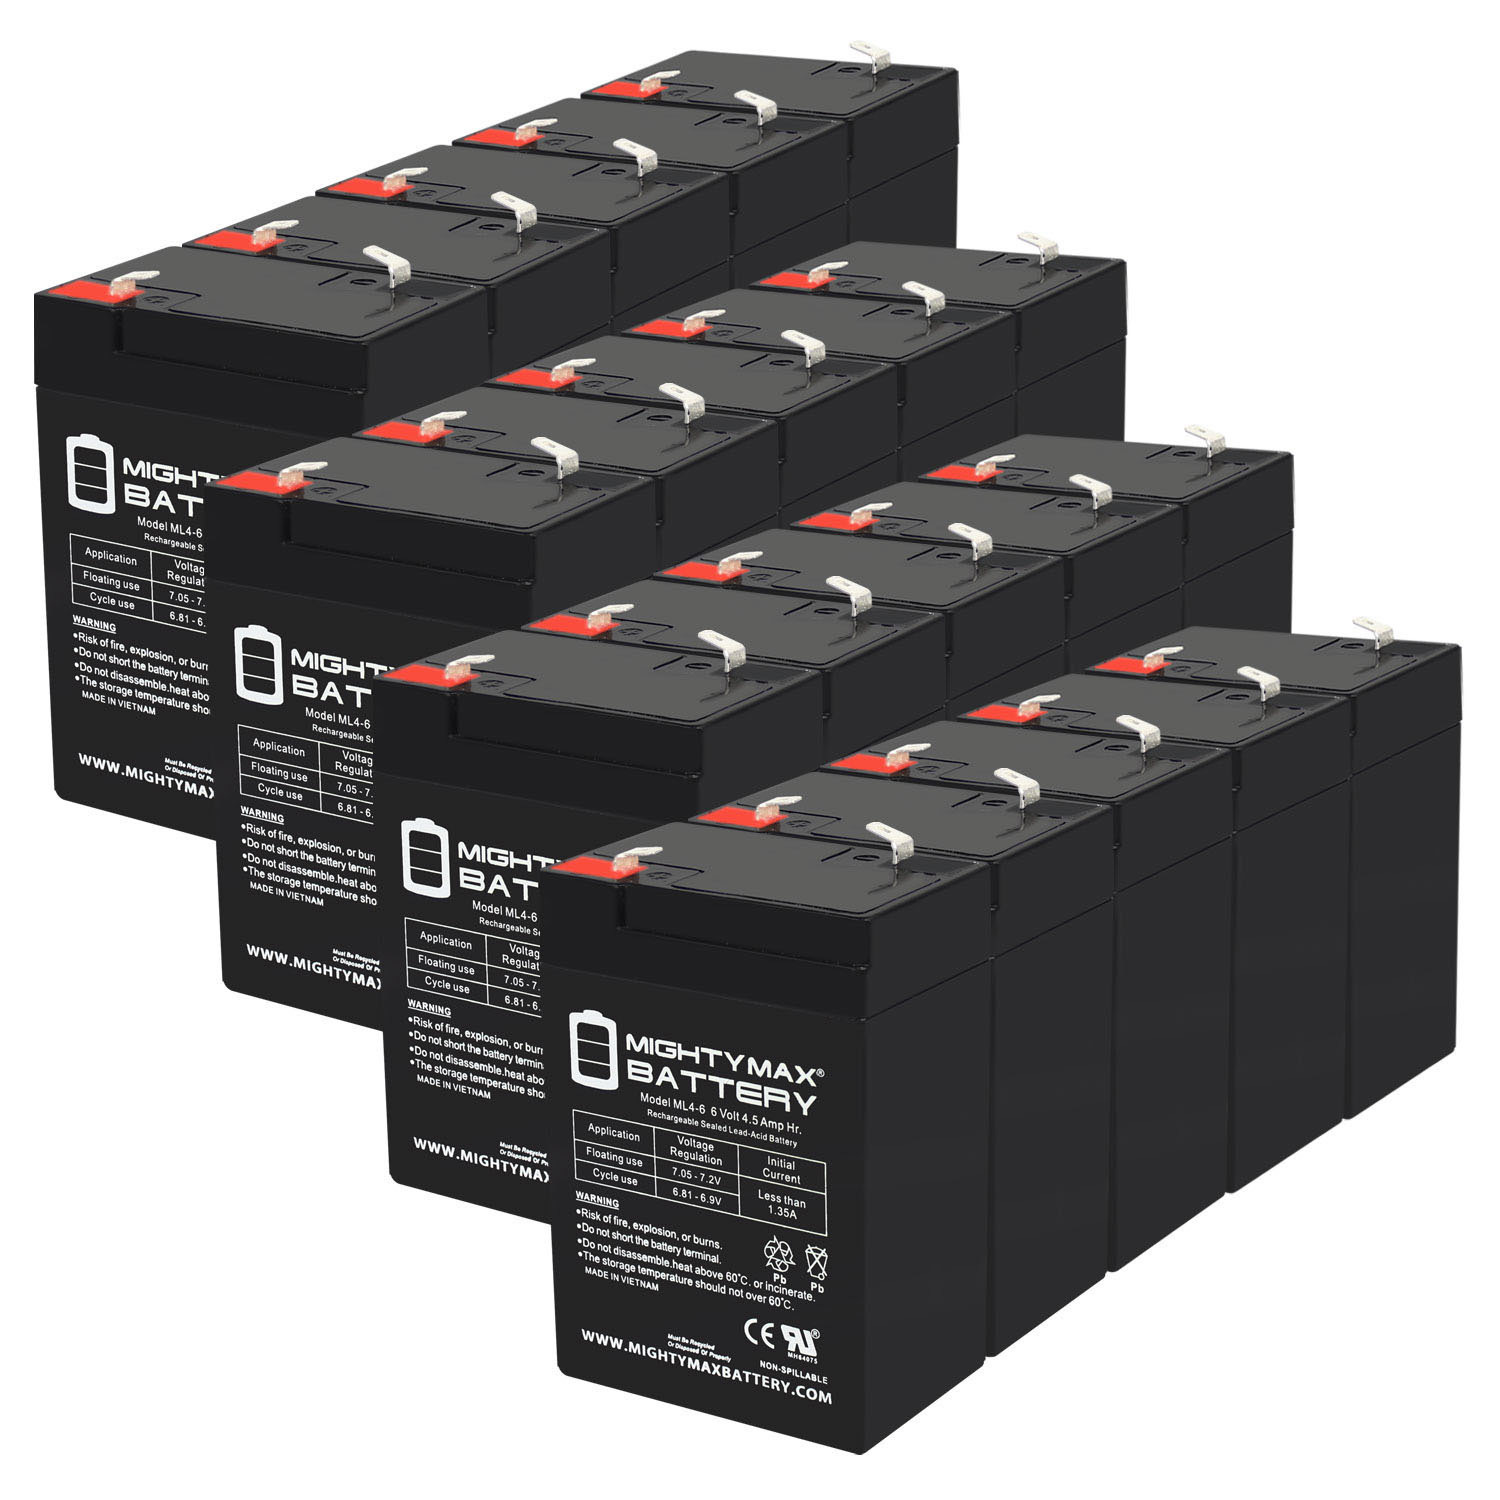 6V 4.5AH Replacement Battery for Power PM 6-4.5 - 20 Pack